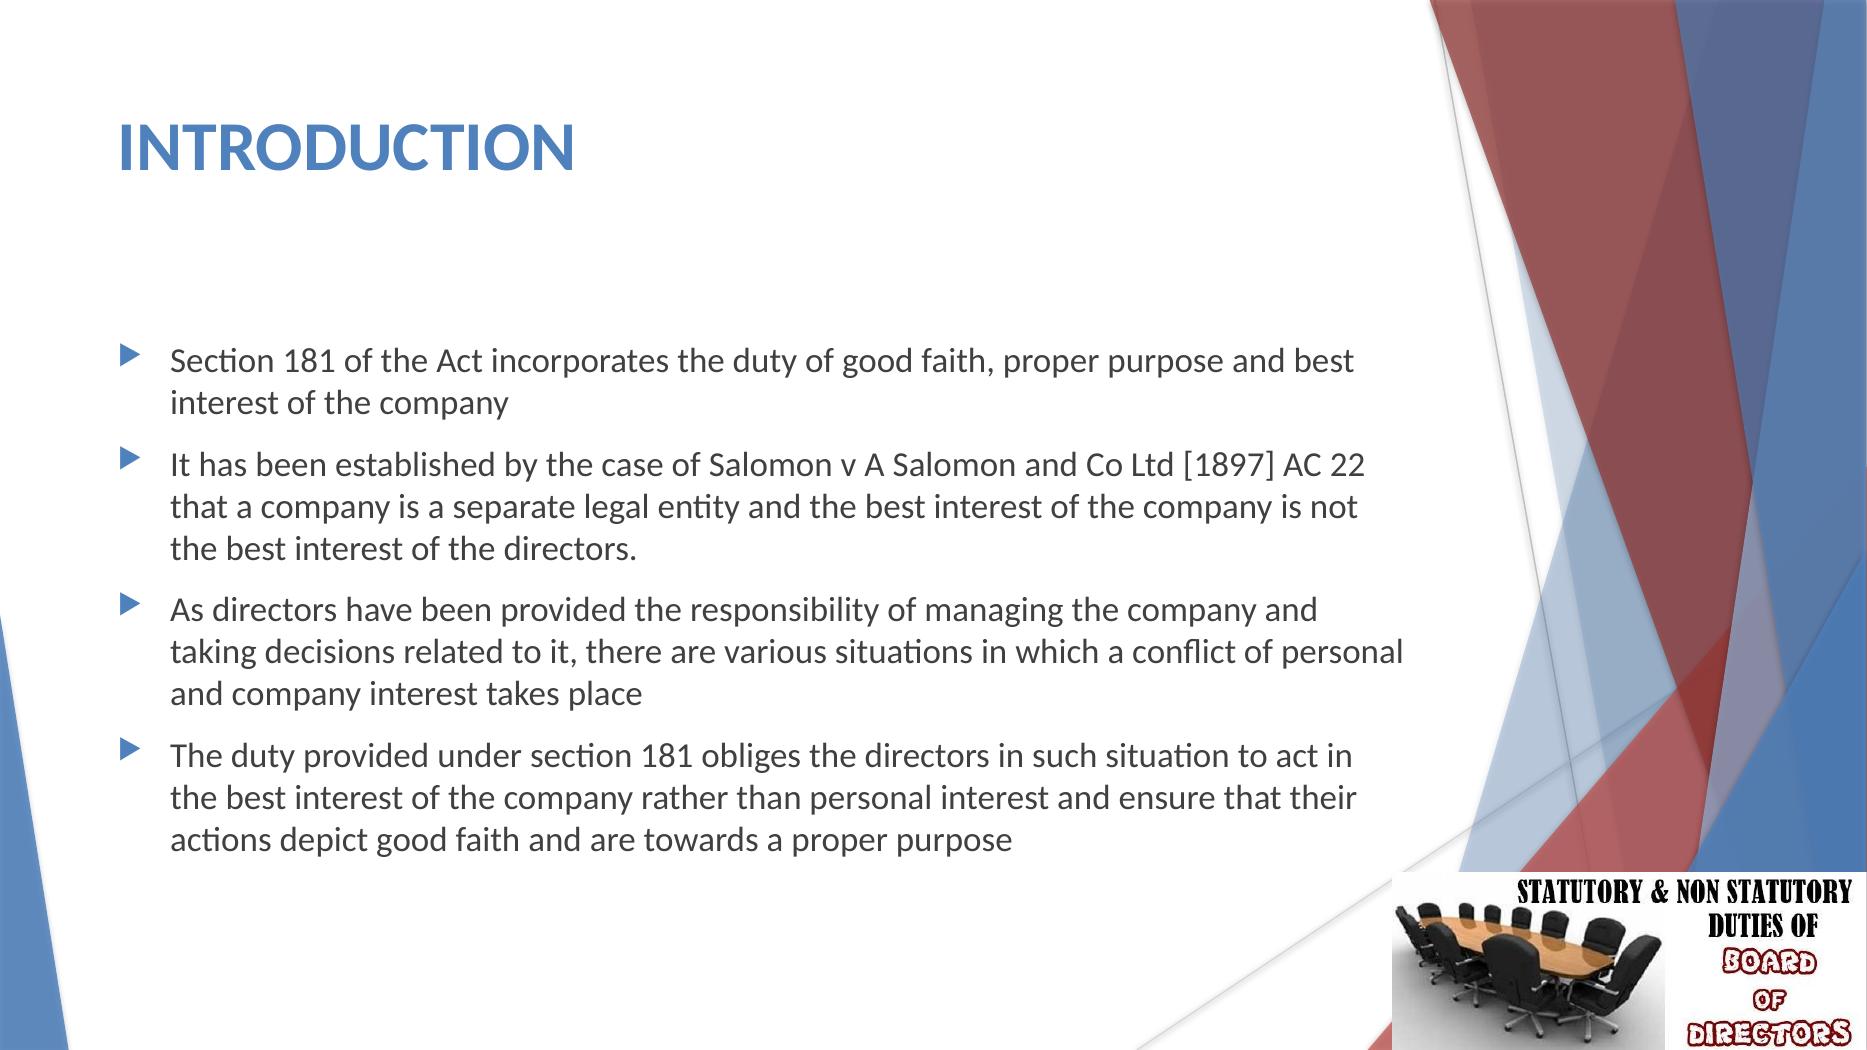 Corporation Law - Assignment Sample_2